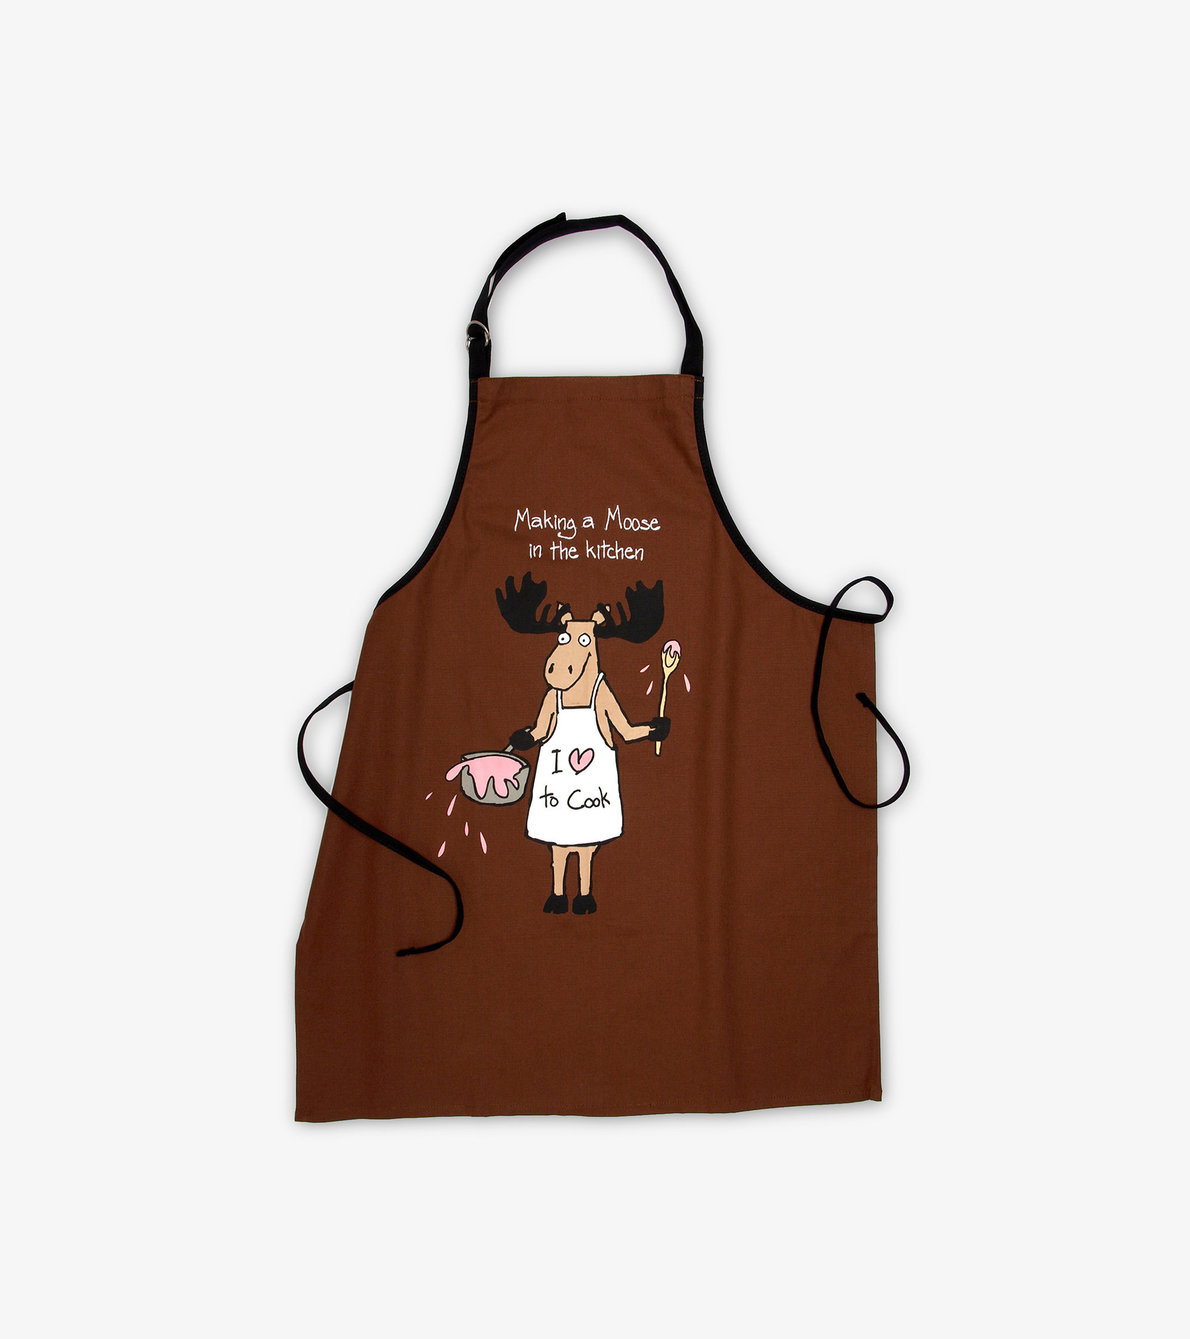 View larger image of Making a Moose in the Kitchen Apron